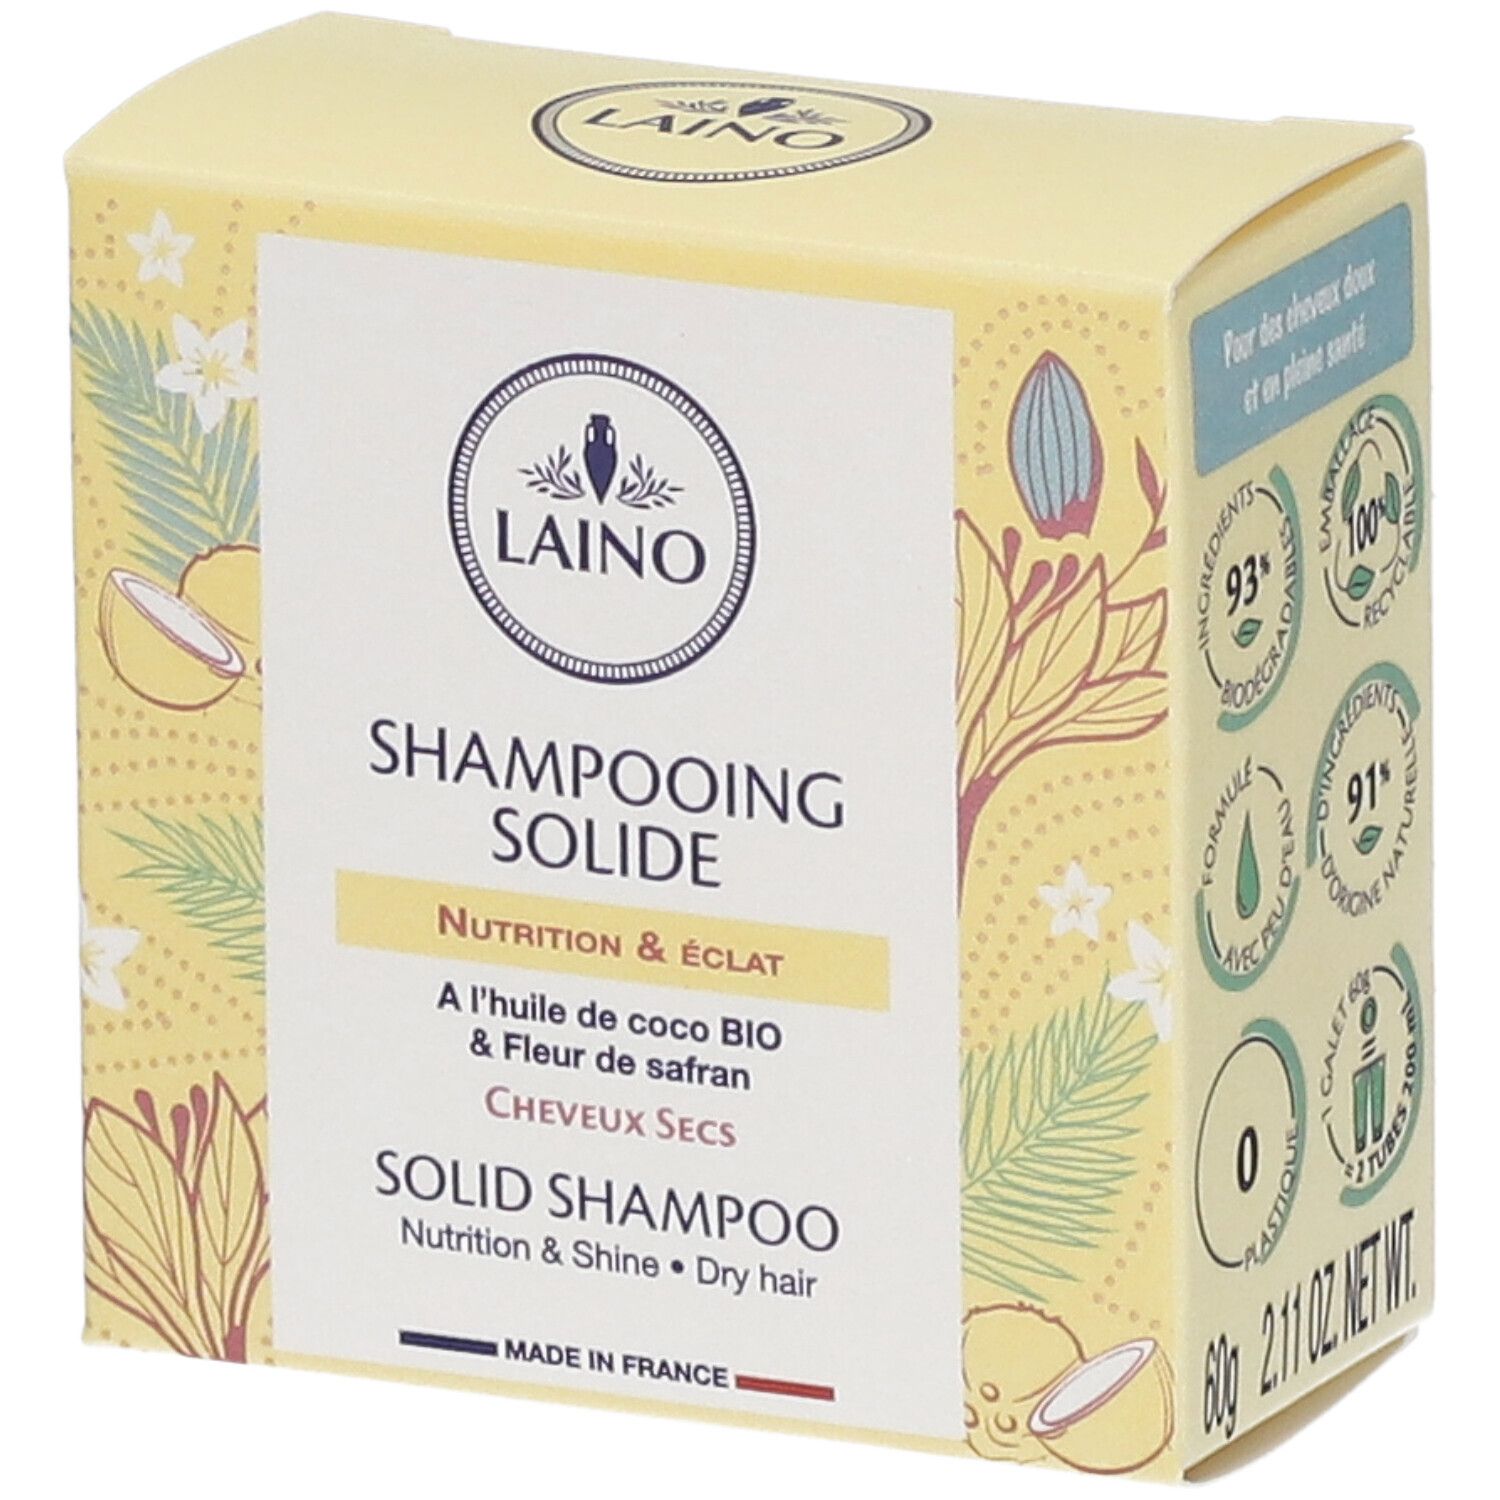 Laino Shampooing solide Nutrition & Éclat